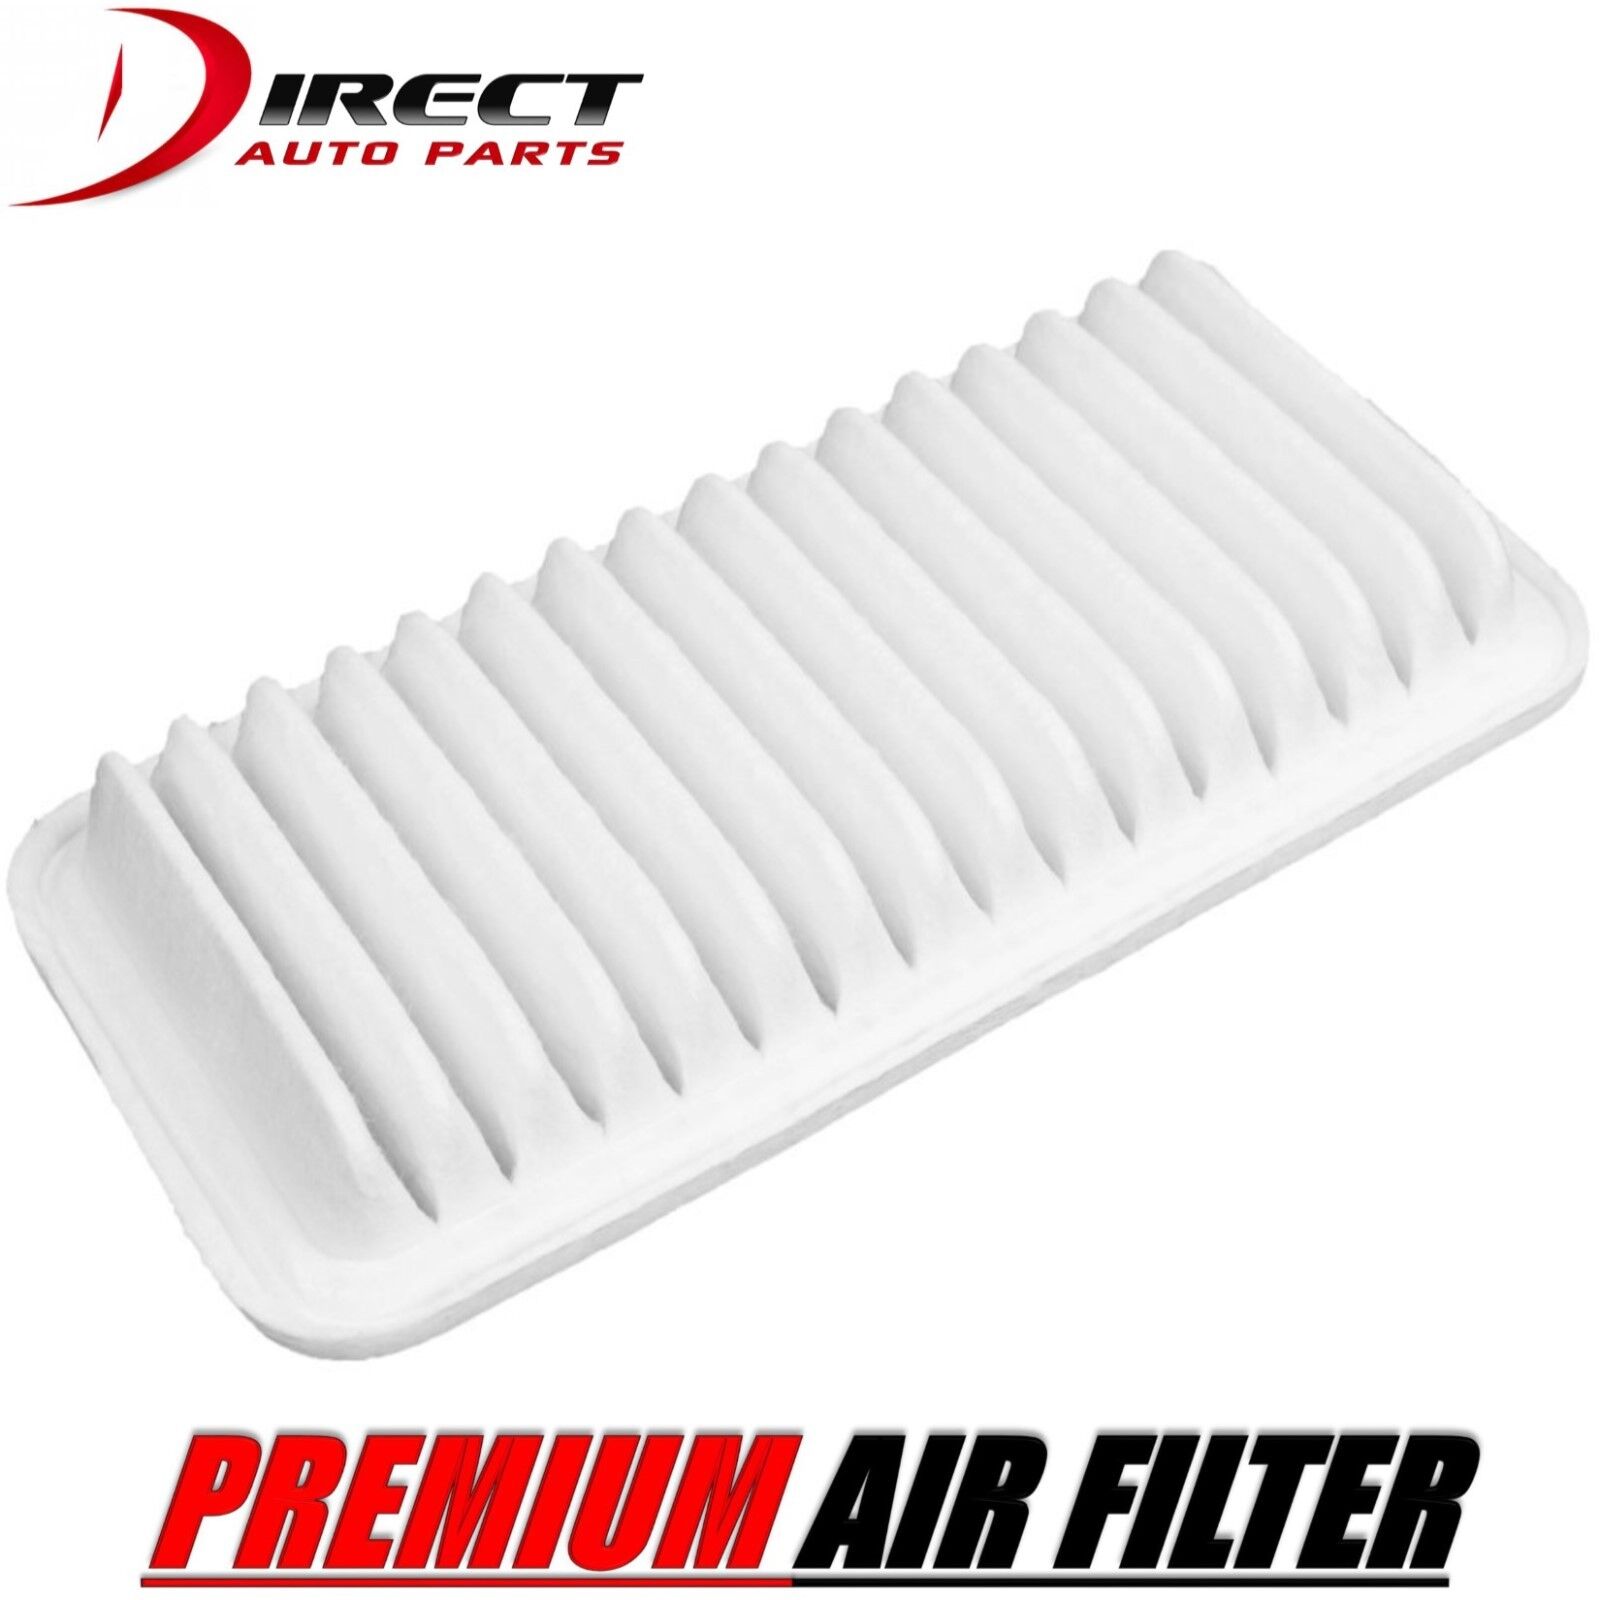 AIR FILTER FOR TOYOTA COROLLA 1.8L ENGINE 2003 - 2008